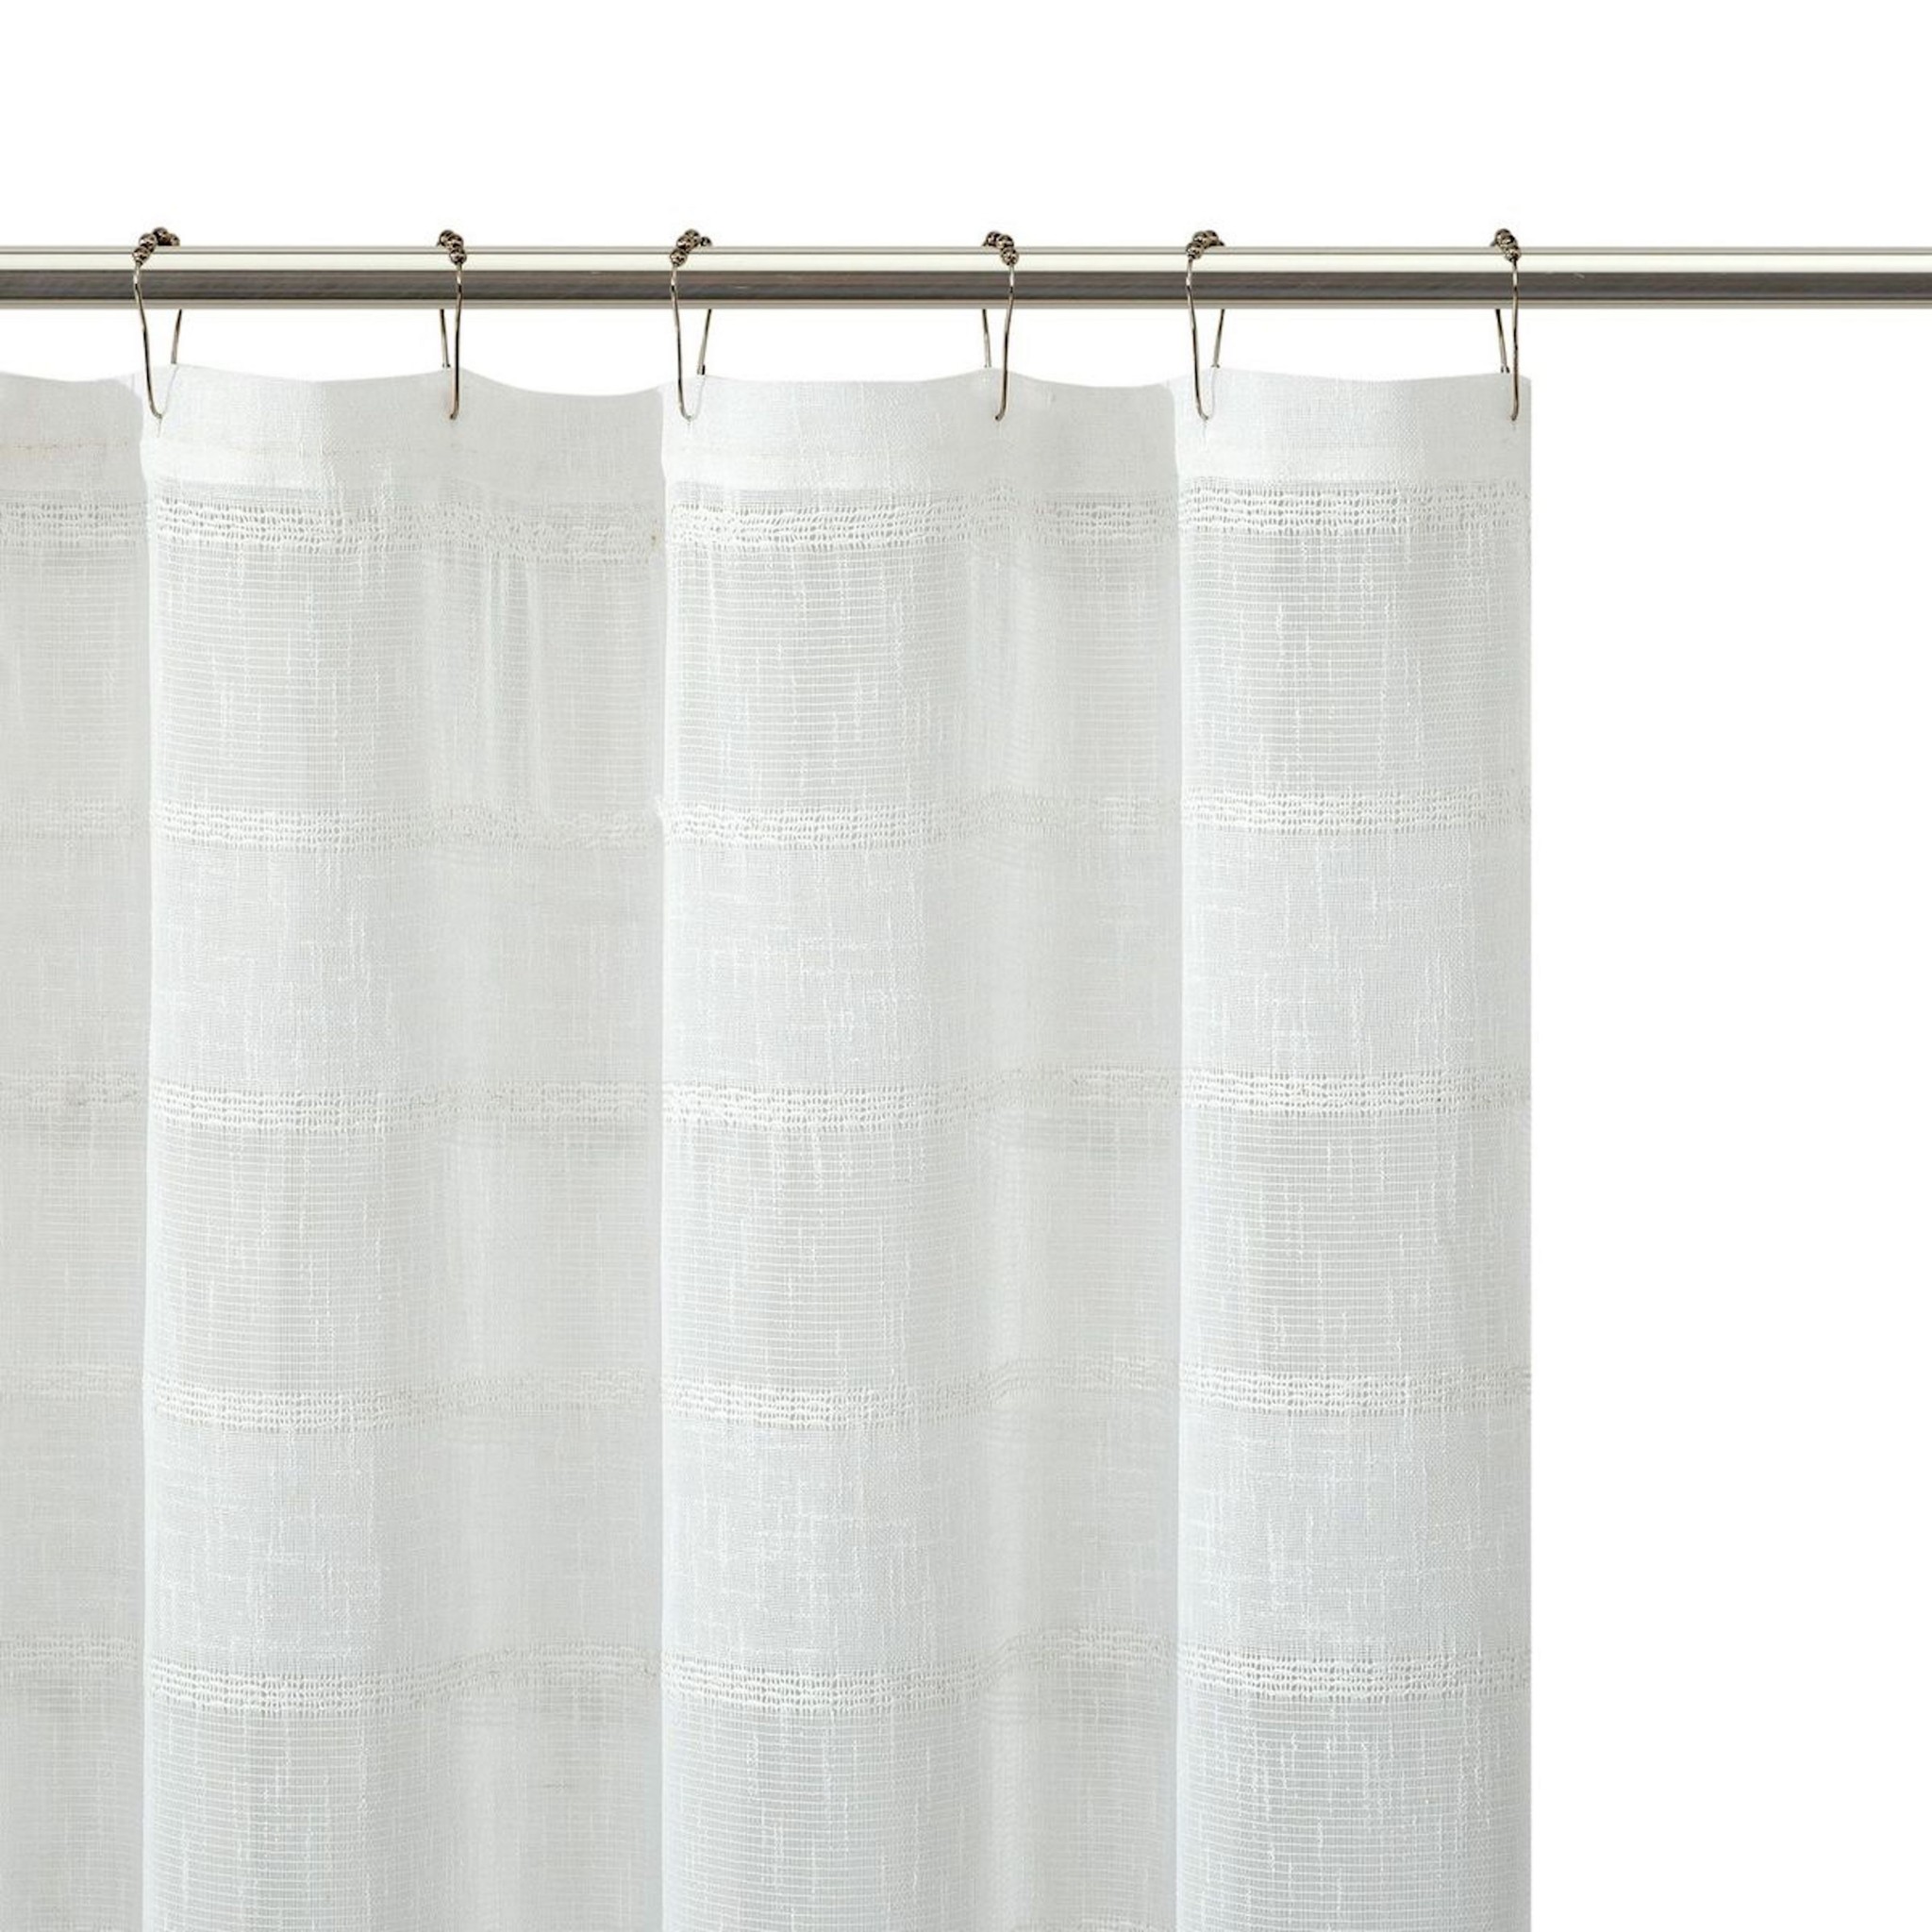 HomeRoots White Striped Embroidered Shower Curtain